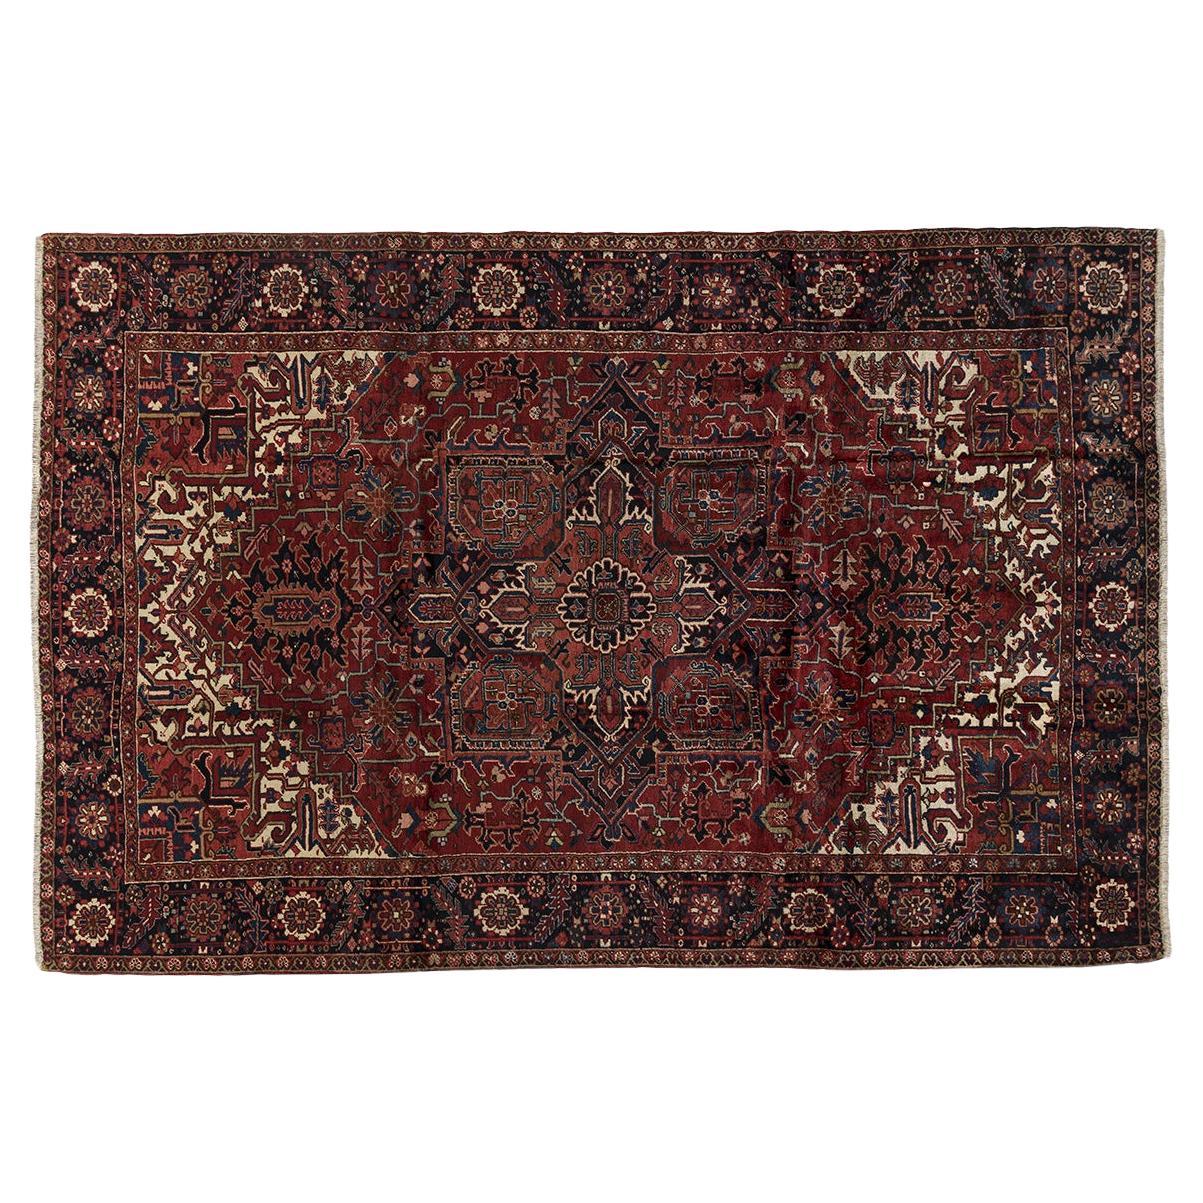 Mid 19th Century Antique Persian Heriz hand knotted carpet with rich red colors